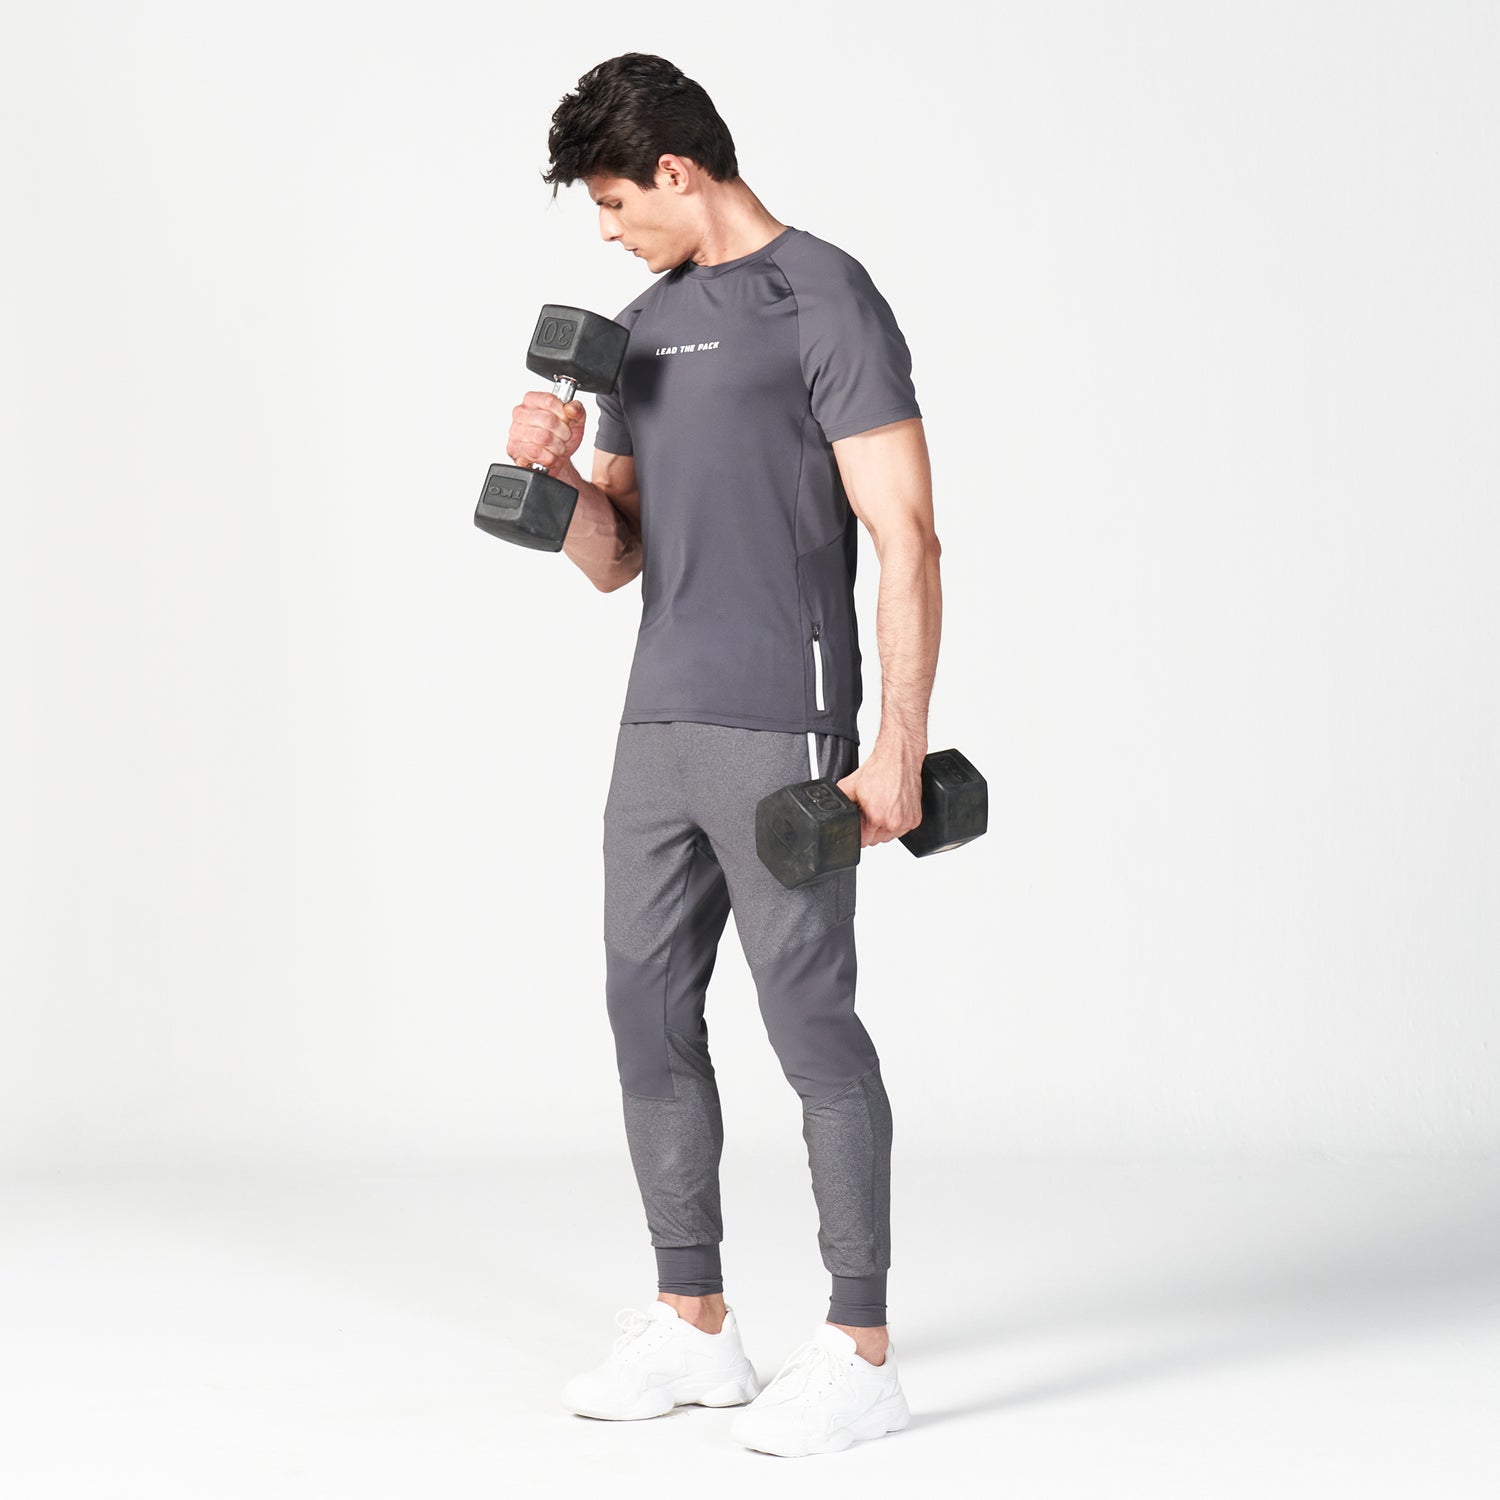 squatwolf-gym-wear-ribbed-tech-tee-grey-workout-shirts-for-men